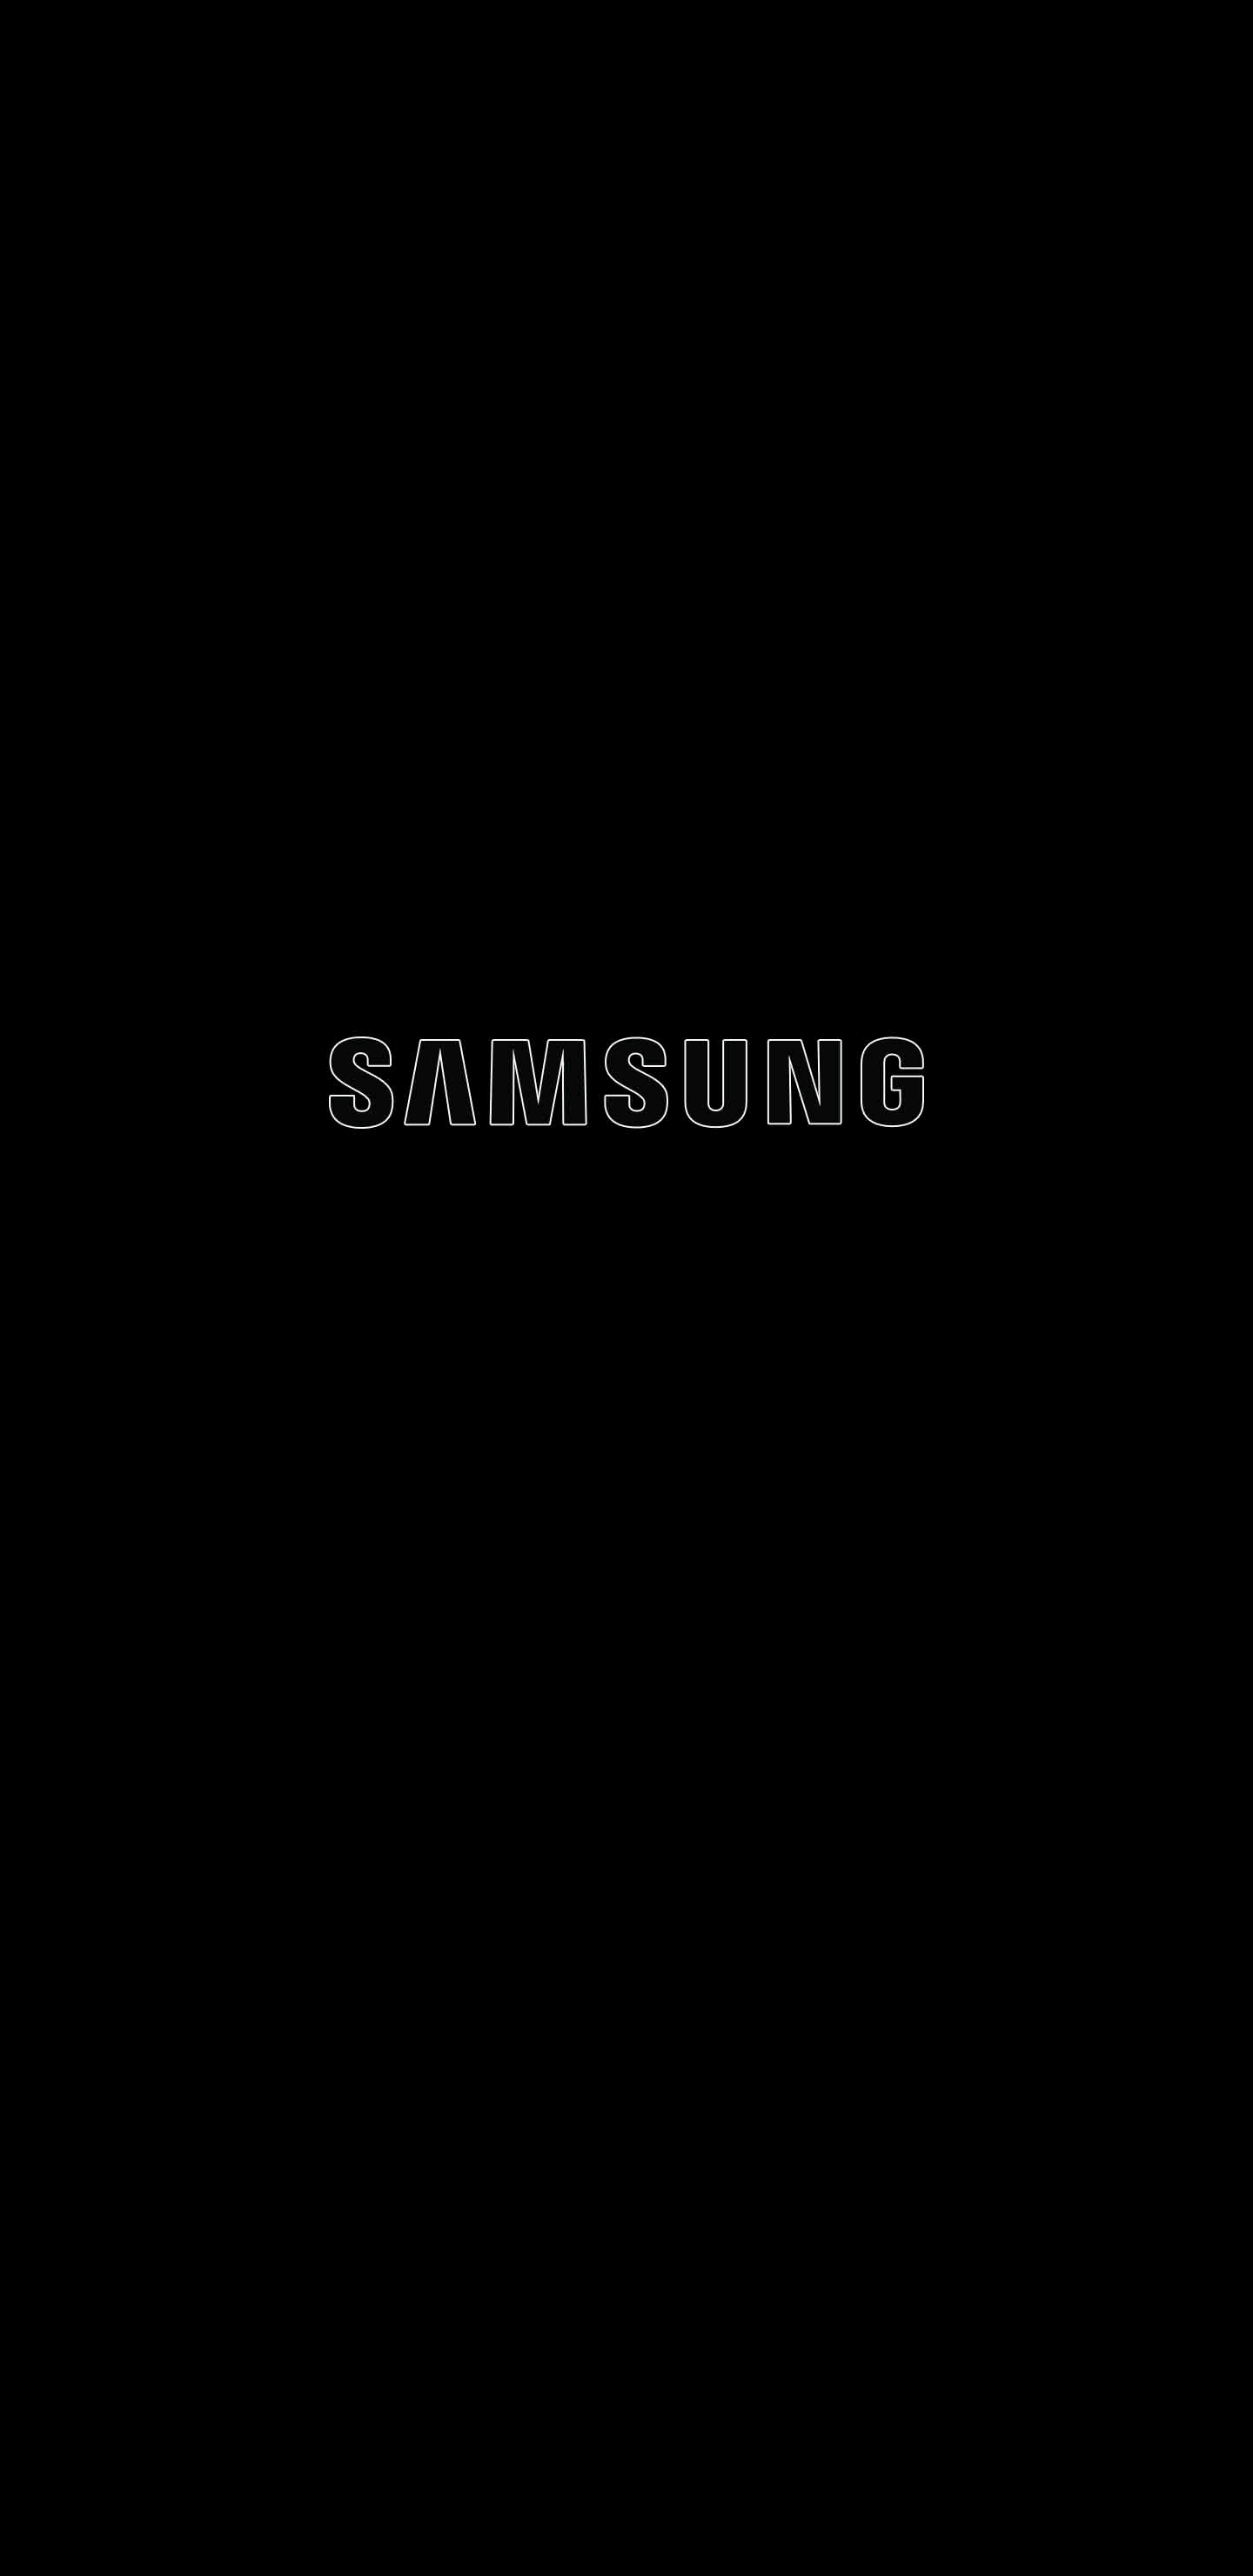 1440x2960 Samsung Logo Phone Wallpapers Top Free Samsung Logo Phone Backgrounds